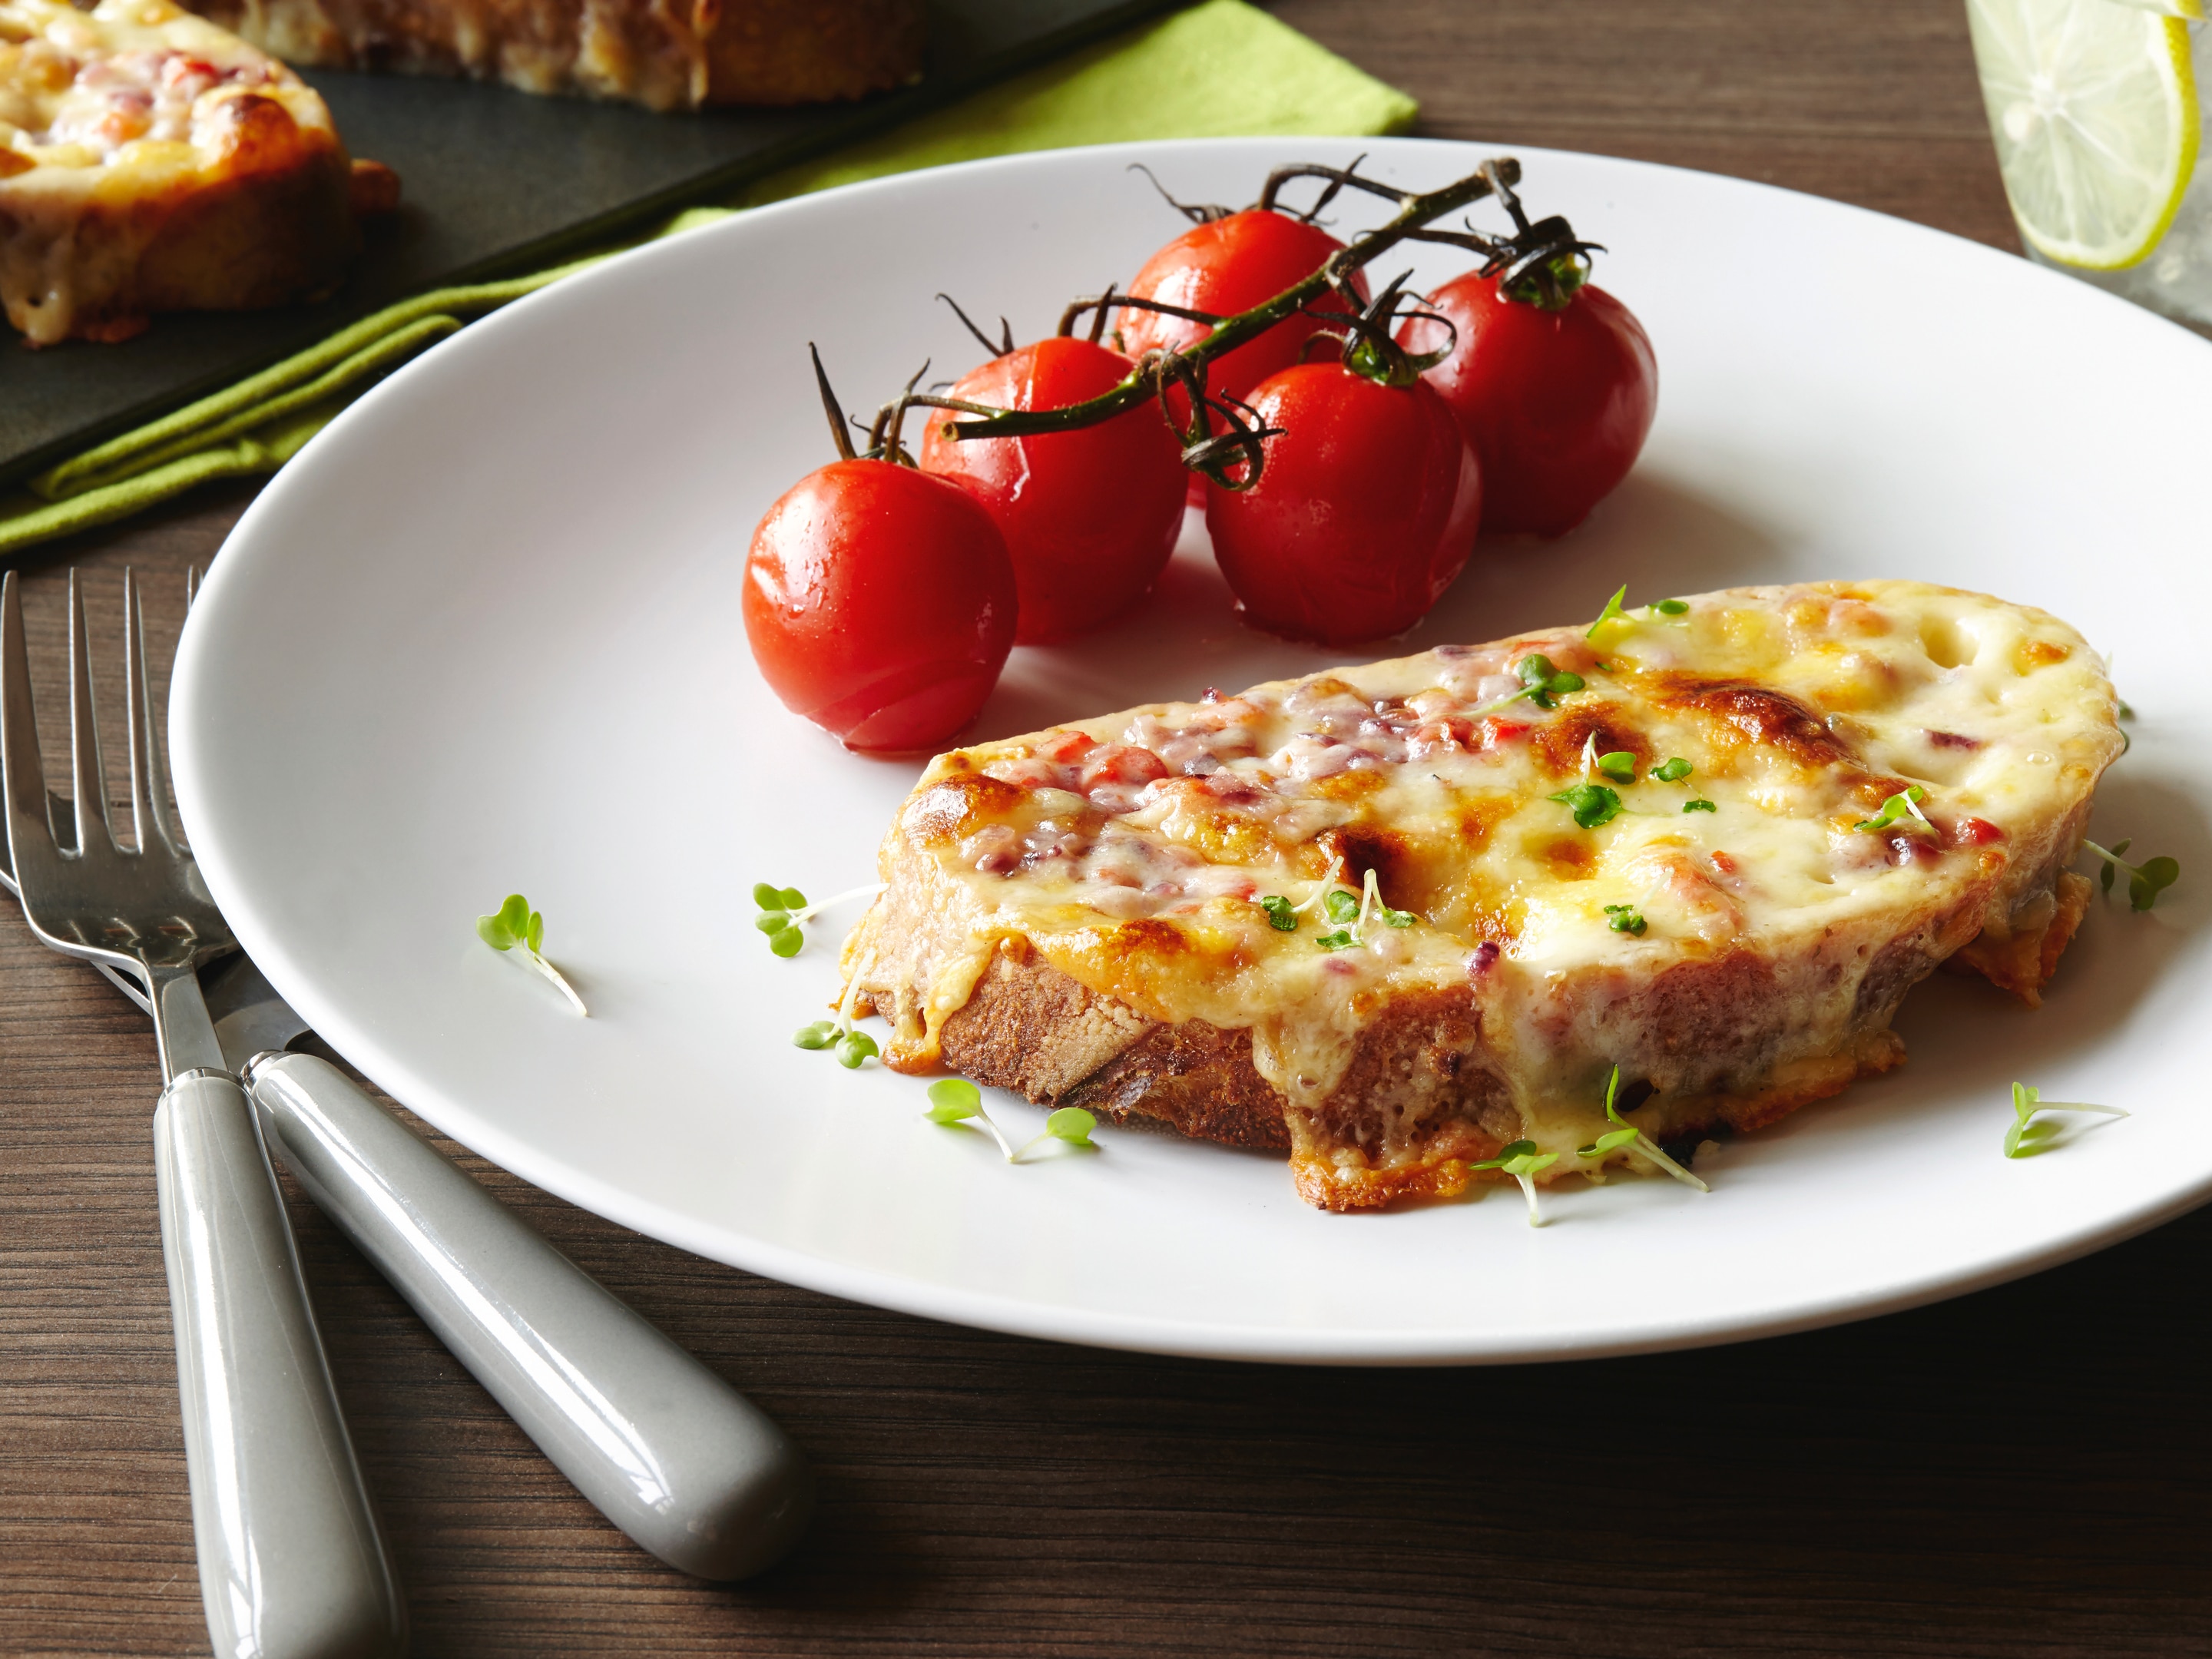 Welsh rarebit beside a vine of cherry tomatoes. on a white plate. White handled cutlery is in the foreground with toasted bread in the background.